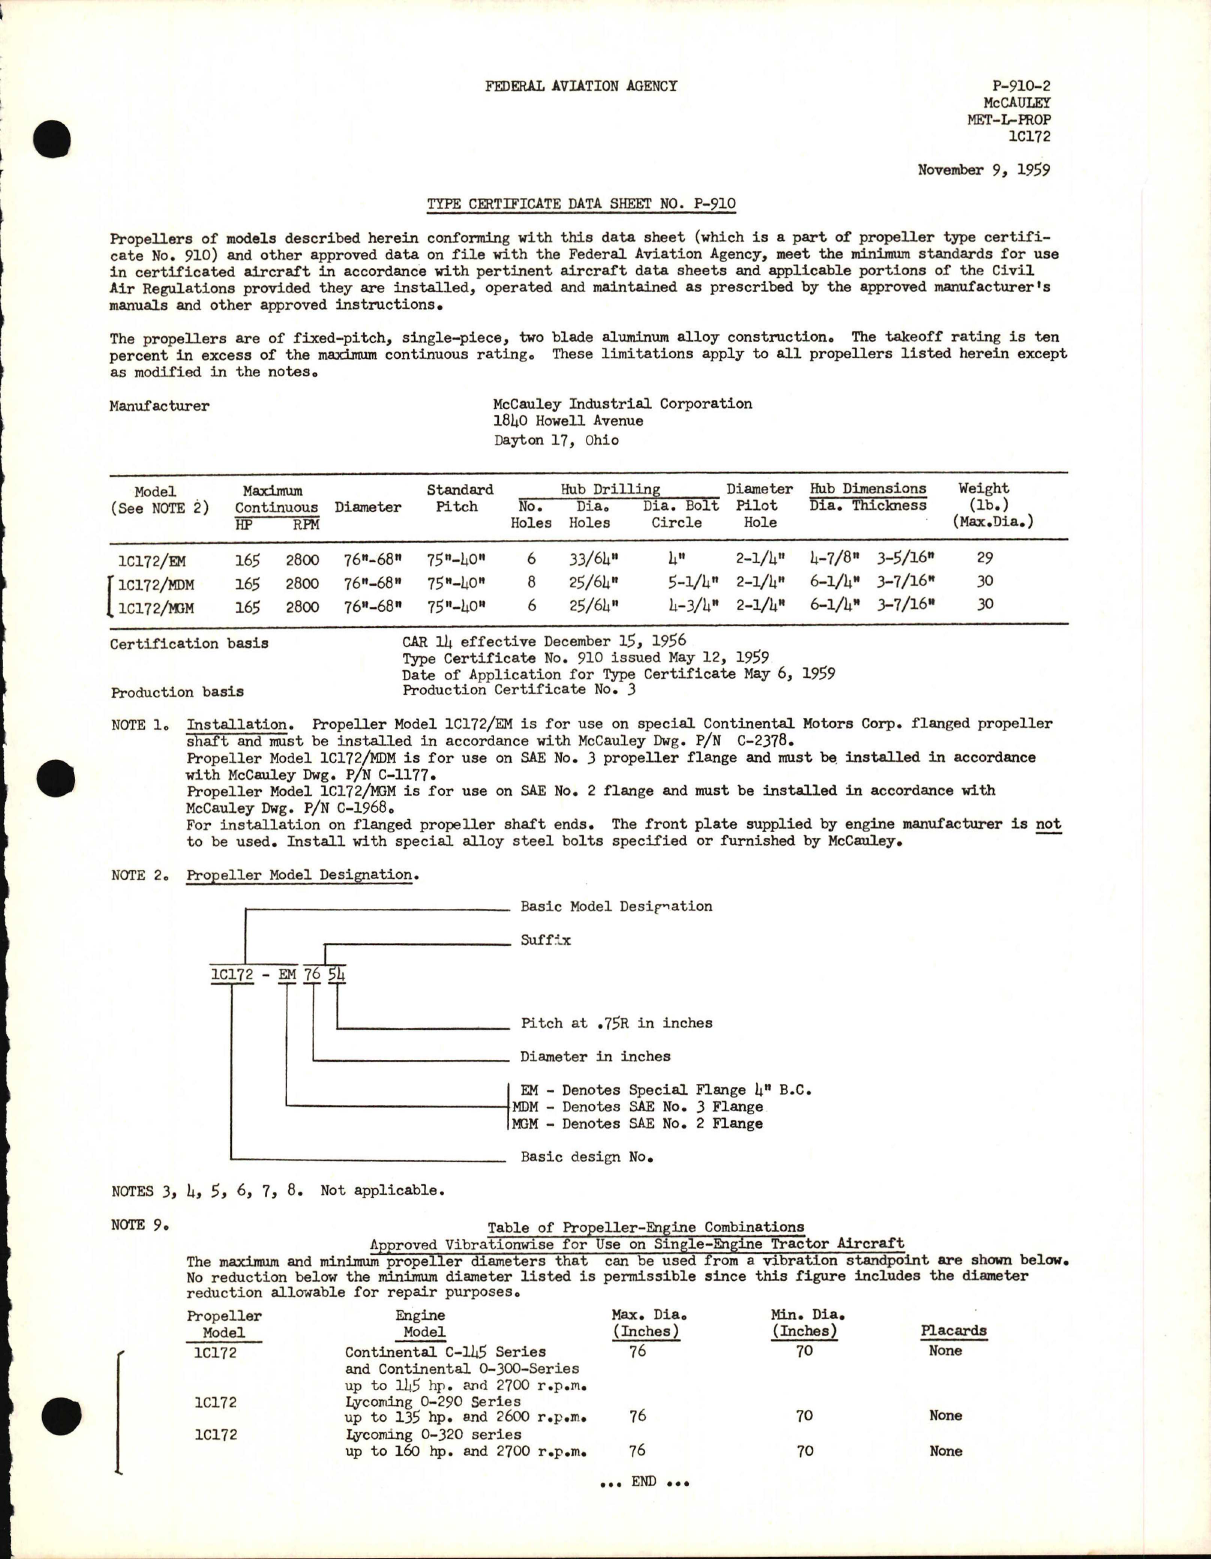 Sample page 1 from AirCorps Library document: 1C172 MET-L-PROP - Type Certificate